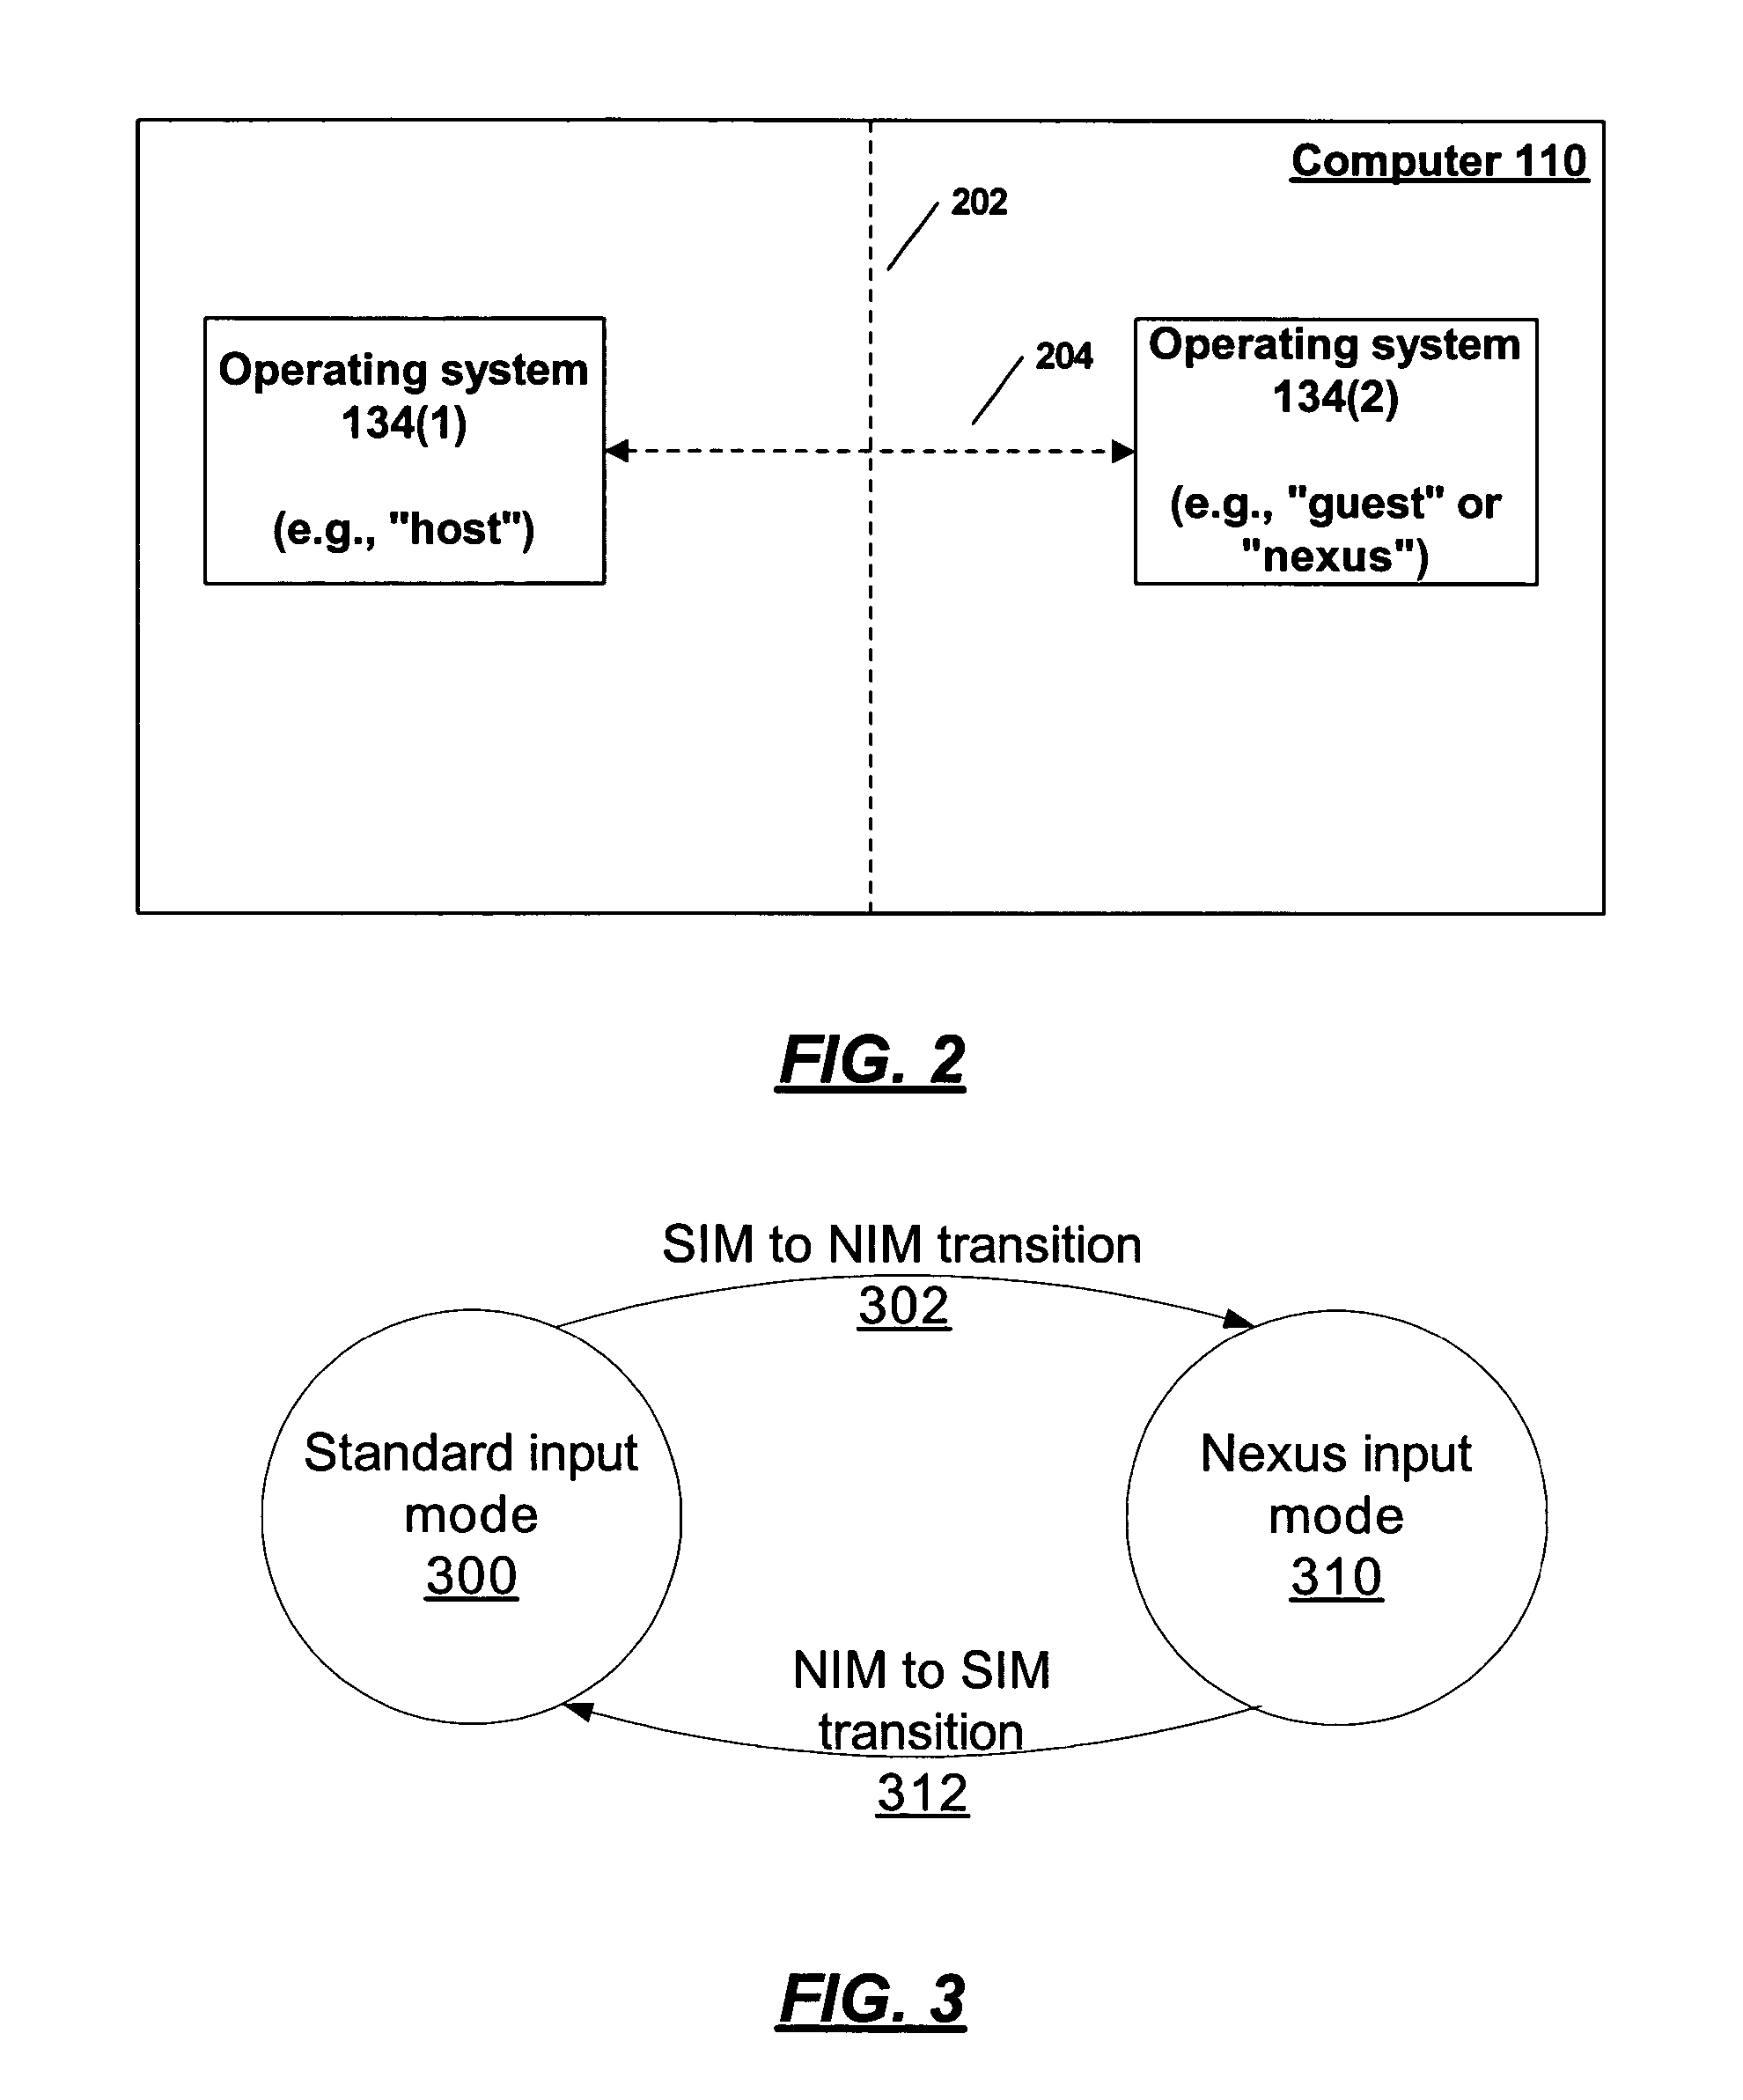 Providing secure input to a system with a high-assurance execution environment